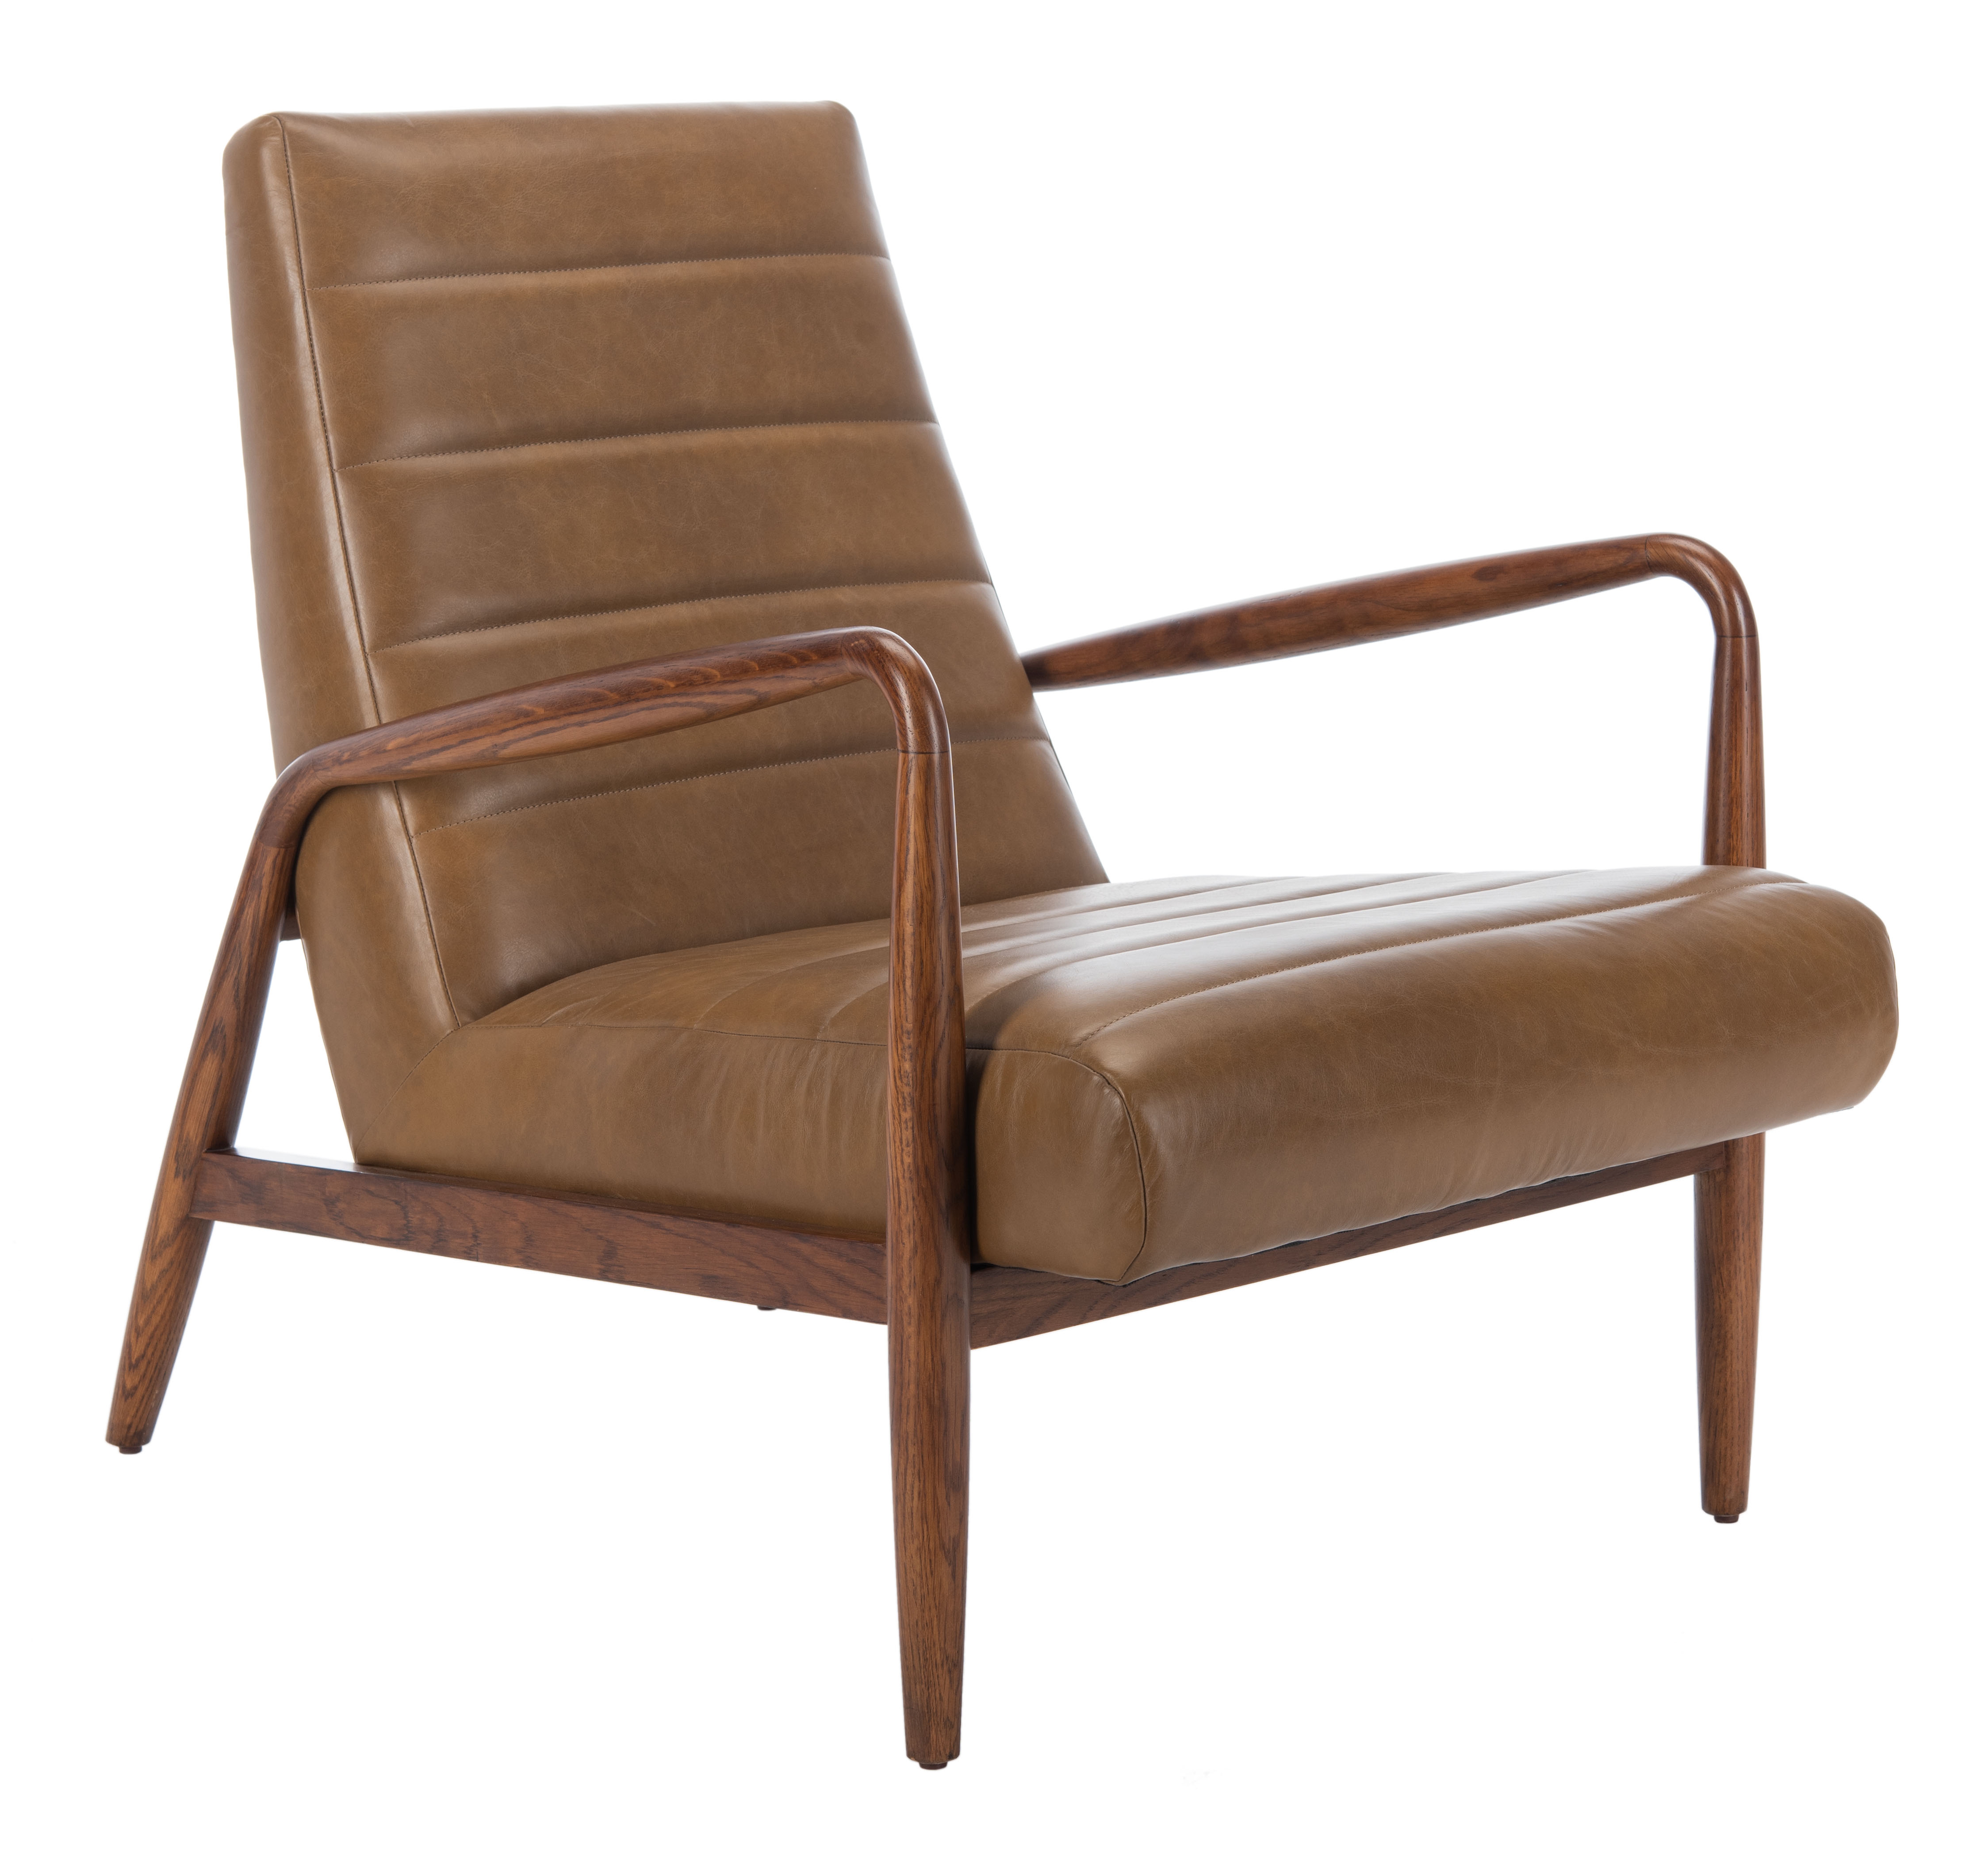 Willow Channel Tufted Arm Chair - Gingerbread/Dark Walnut  - Arlo Home - Arlo Home